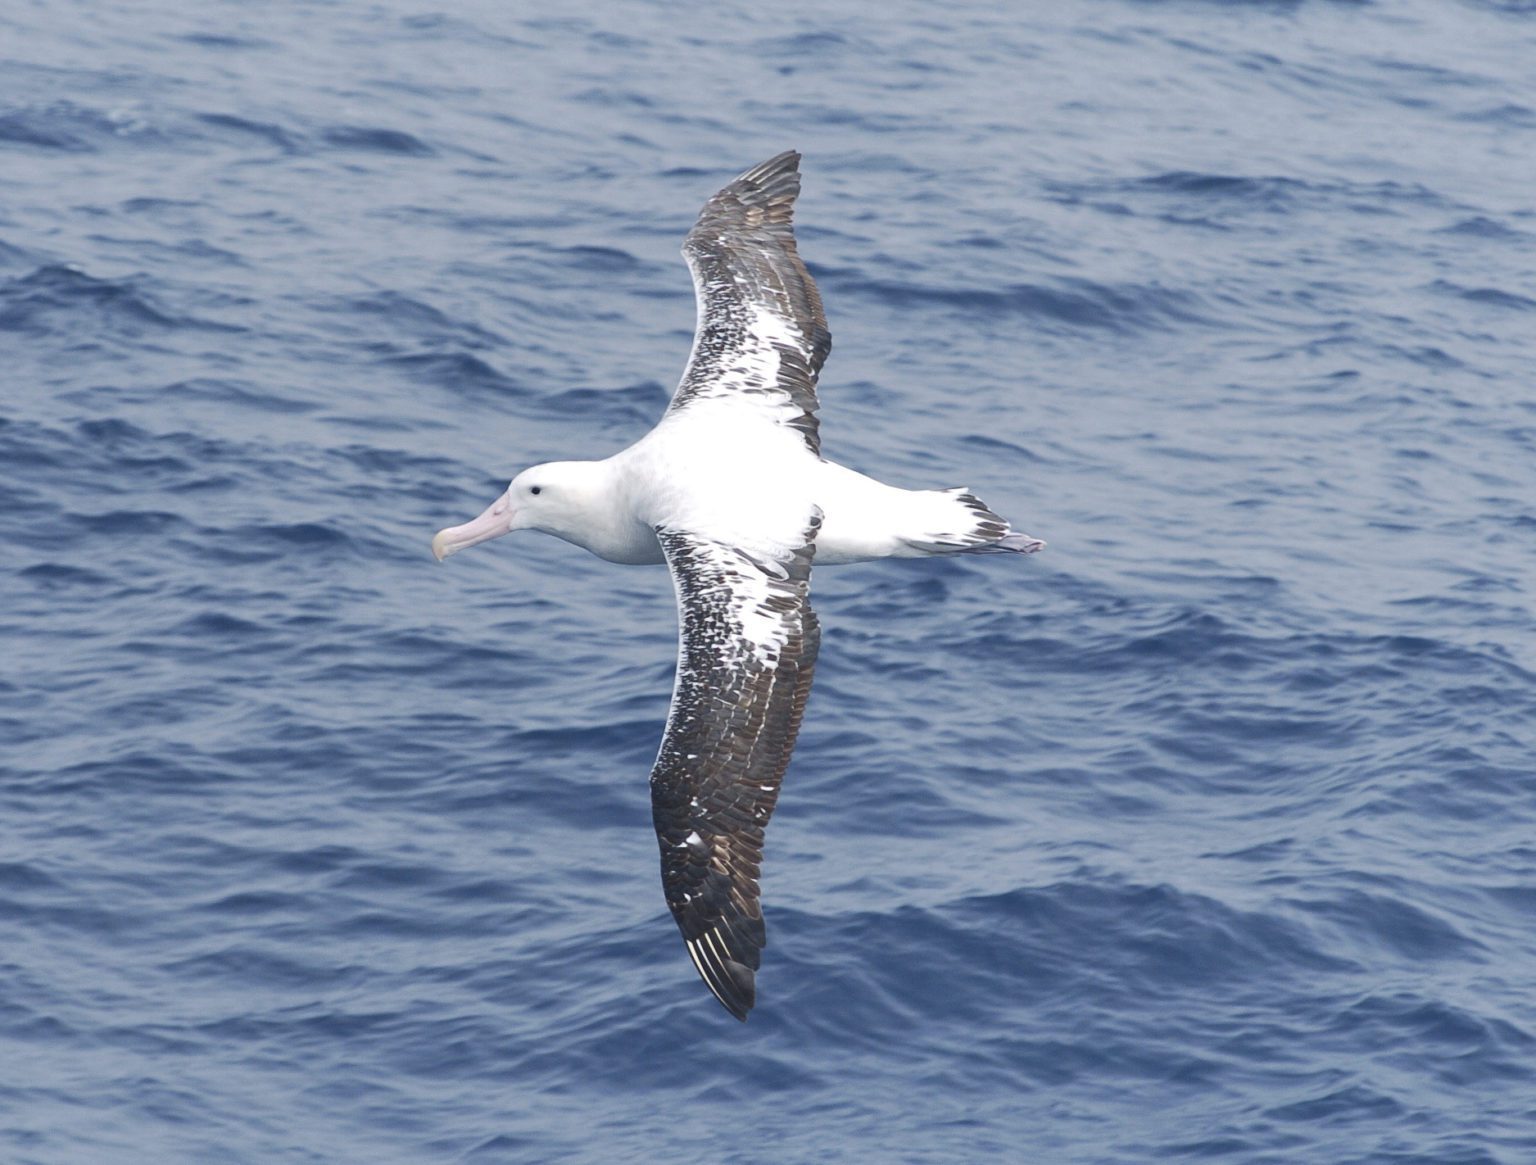 wandering albatross gliding with full wing span over the Antarctic seas